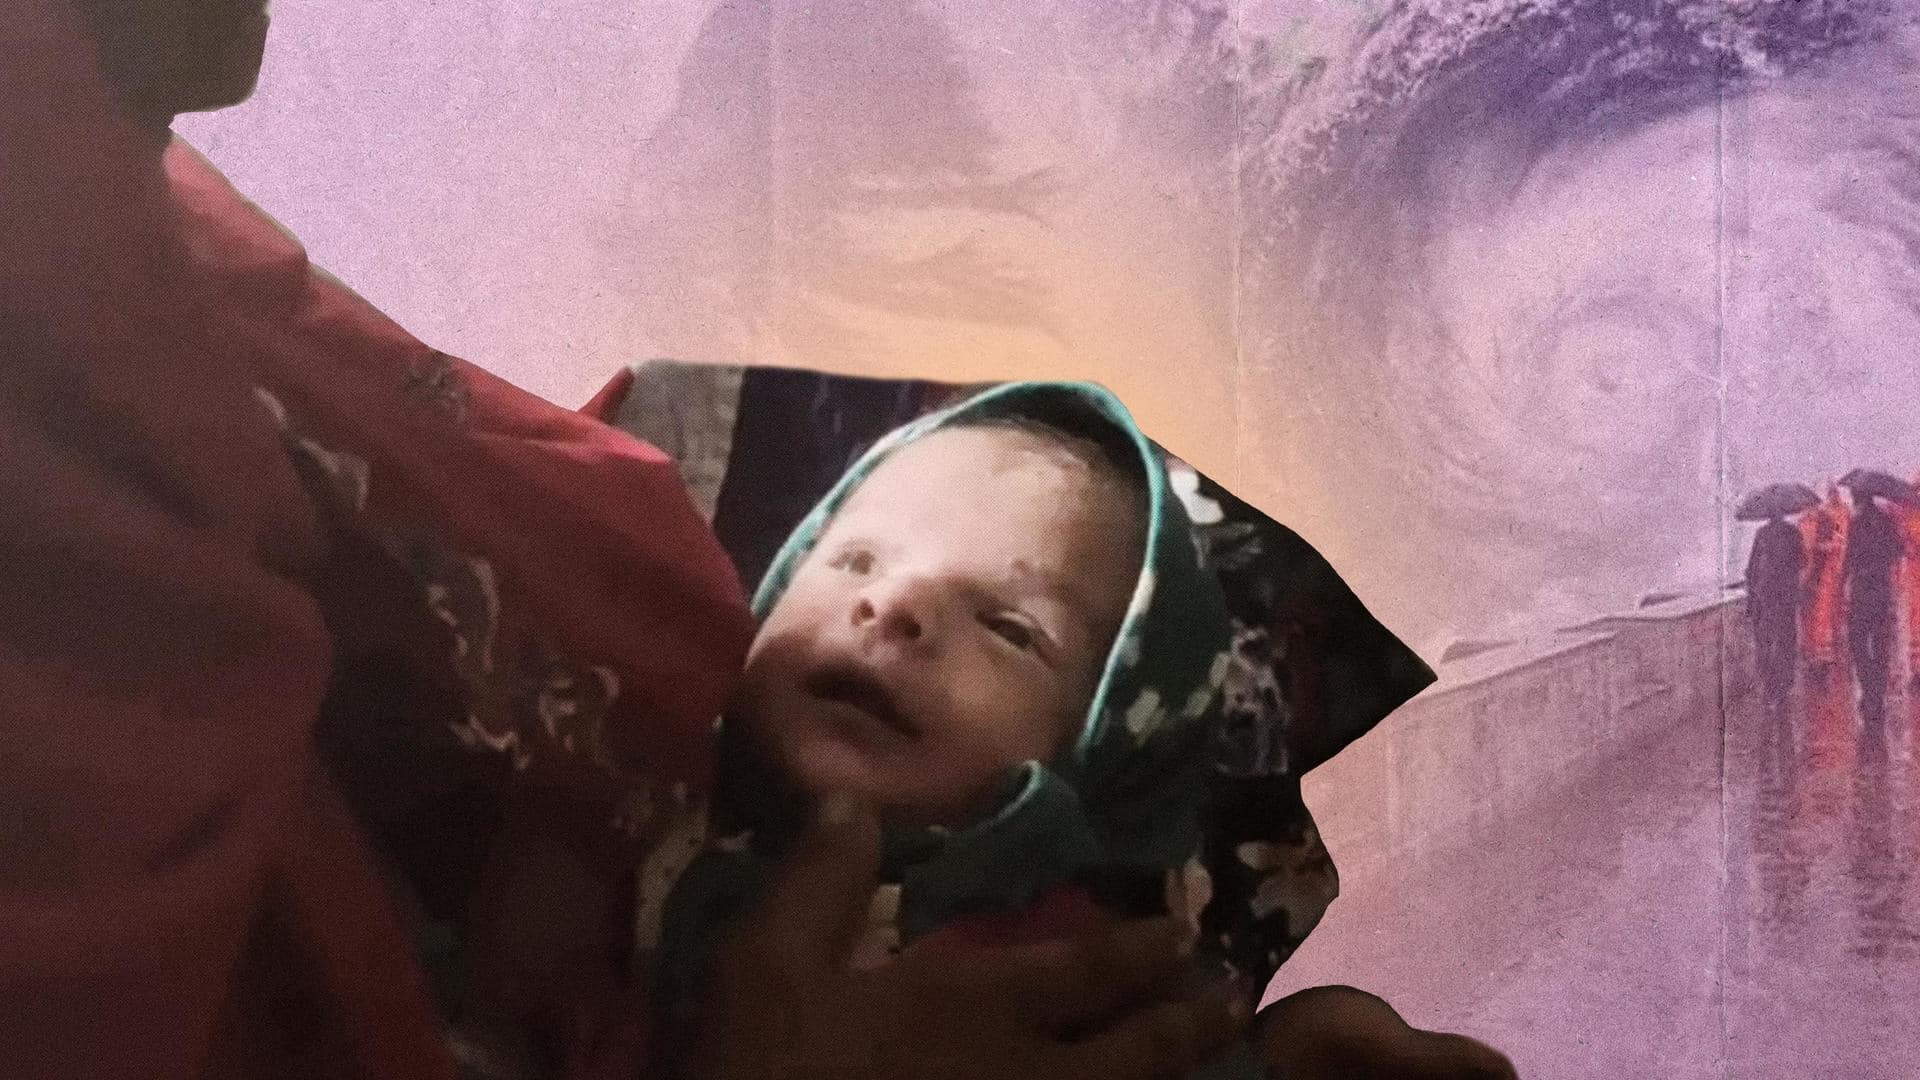 Say hello to one-month-old baby Biparjoy, named after the cyclone